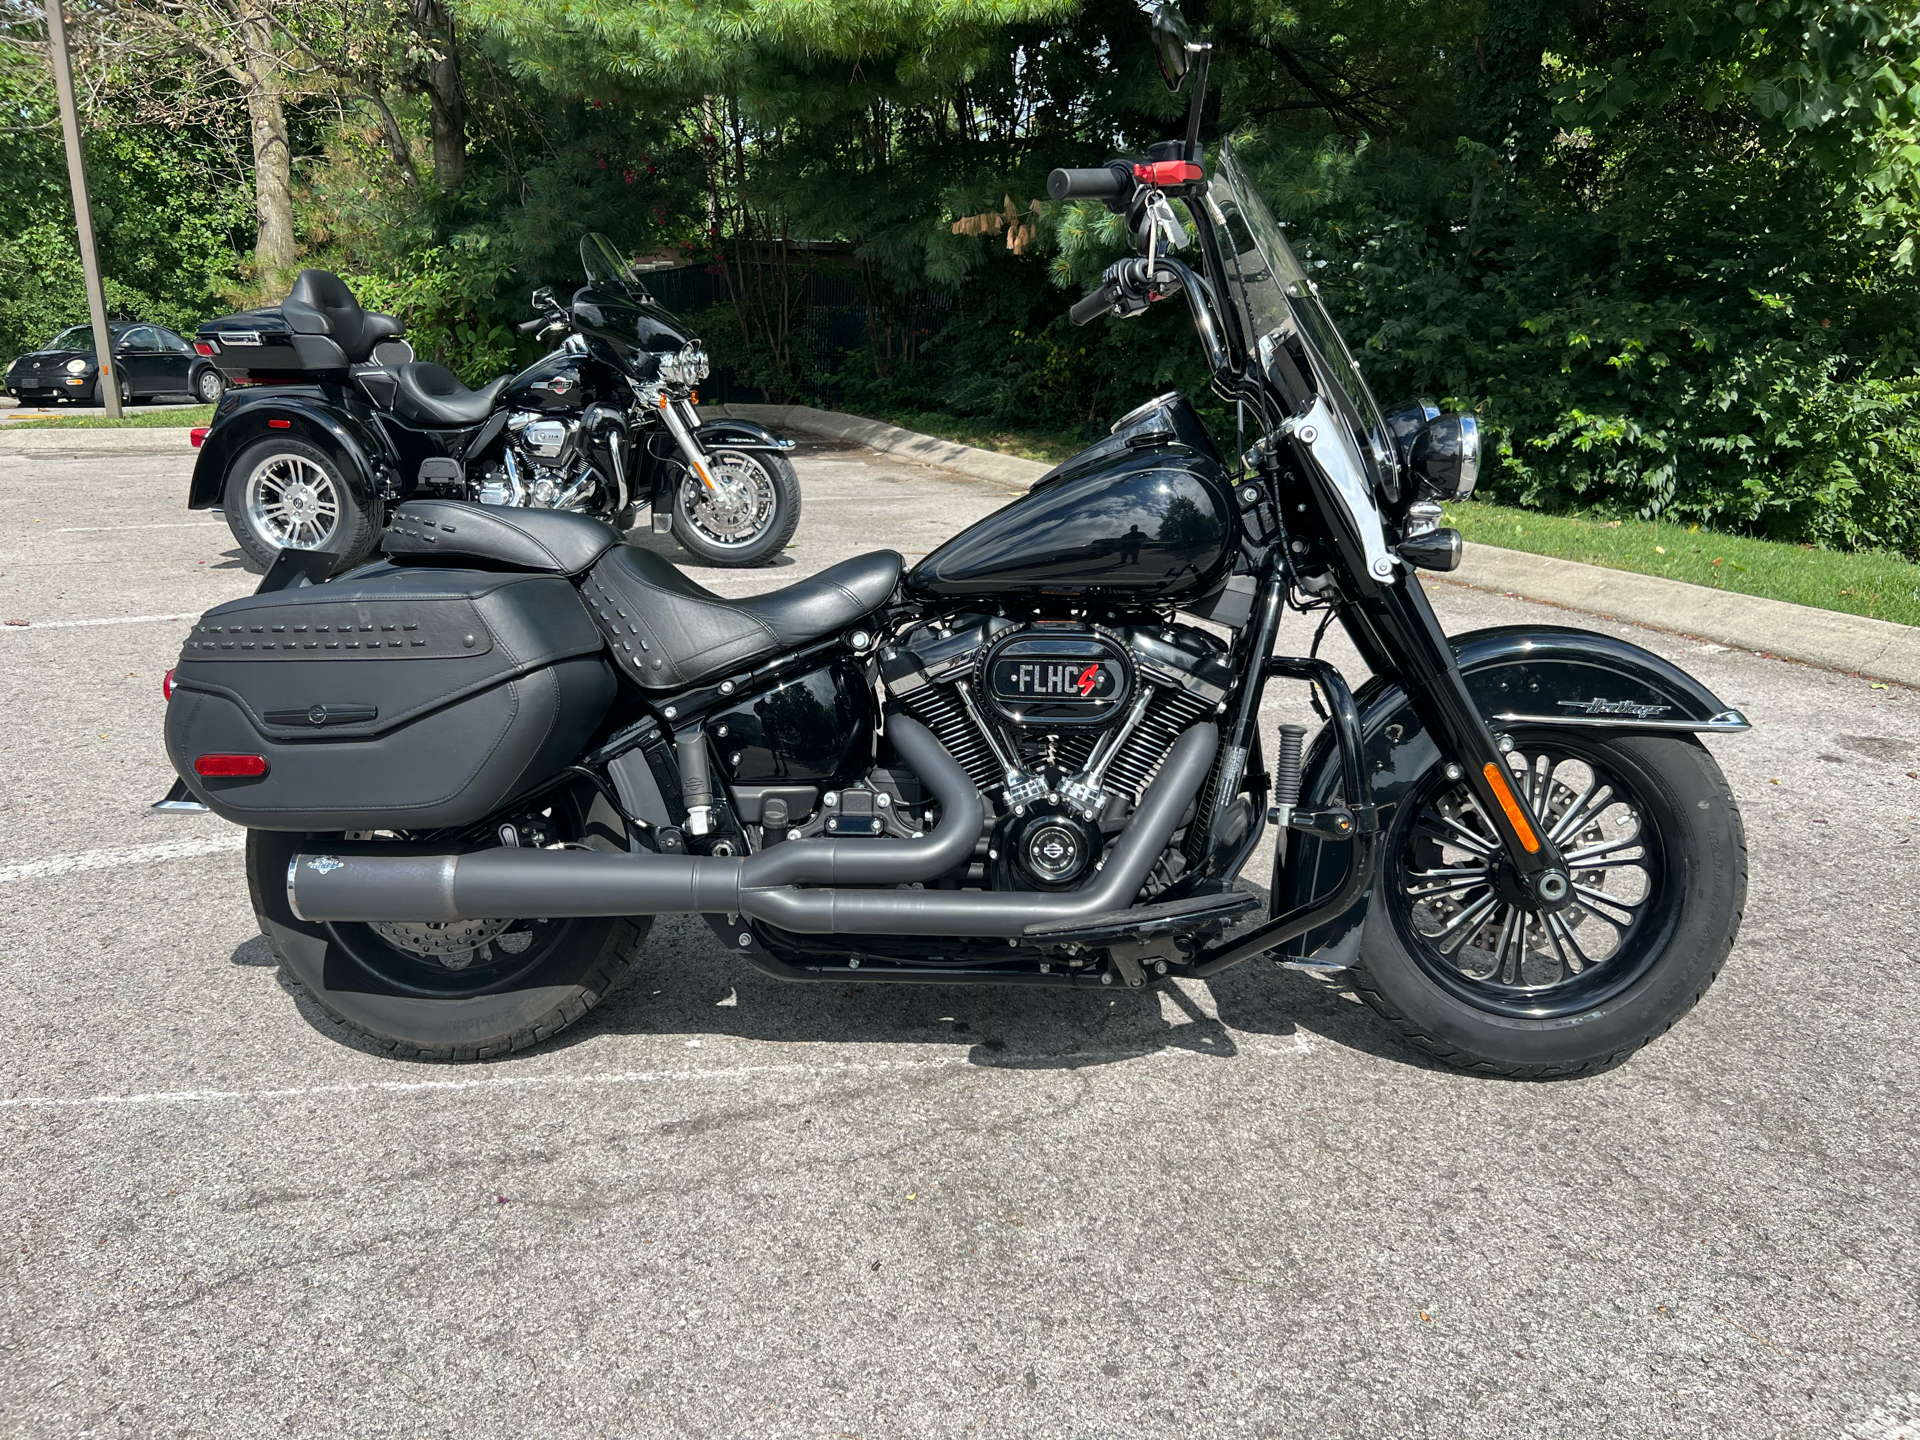 2019 Harley-Davidson Heritage Classic 114 in Franklin, Tennessee - Photo 1